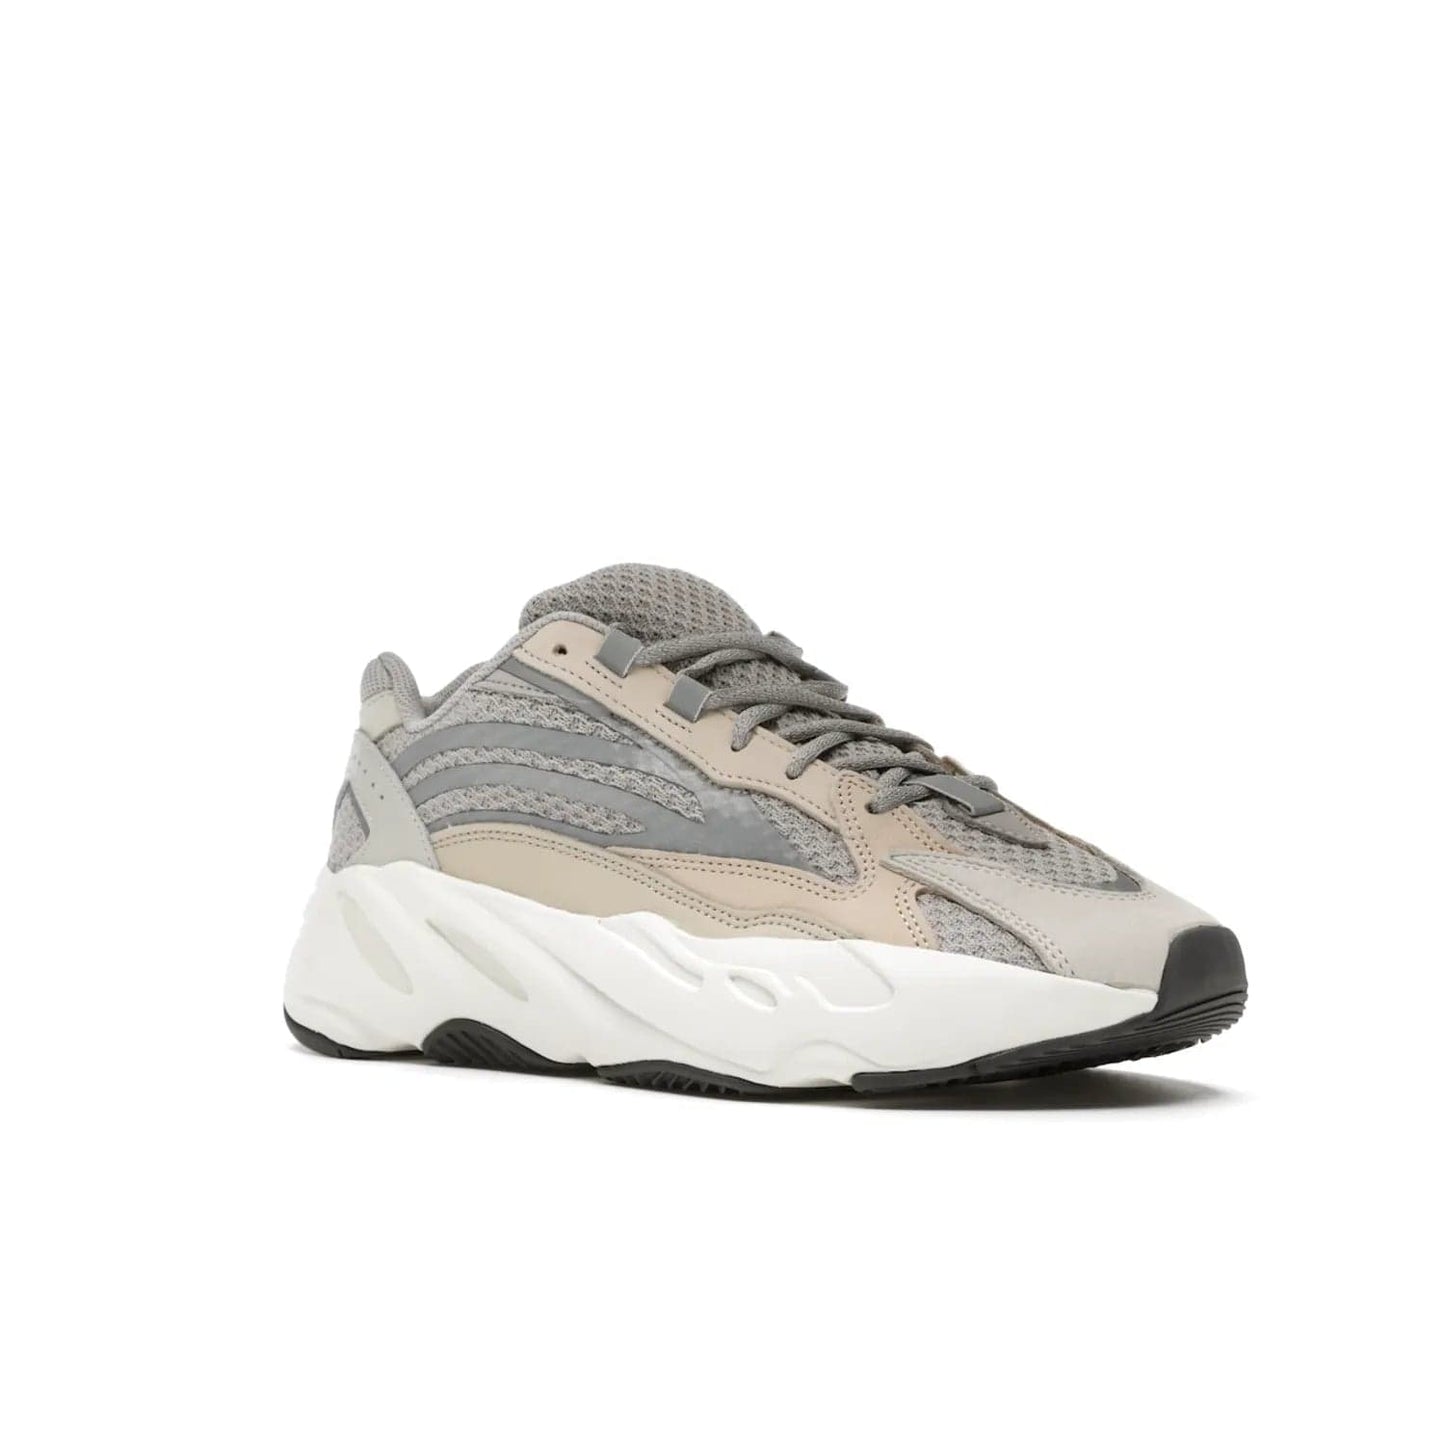 adidas Yeezy Boost 700 V2 Cream - Image 5 - Only at www.BallersClubKickz.com - Add style and luxury to your wardrobe with the adidas Yeezy 700 V2 Cream. Featuring a unique reflective upper, leather overlays, mesh underlays and the signature BOOST midsole, this silhouette is perfect for any stylish wardrobe.